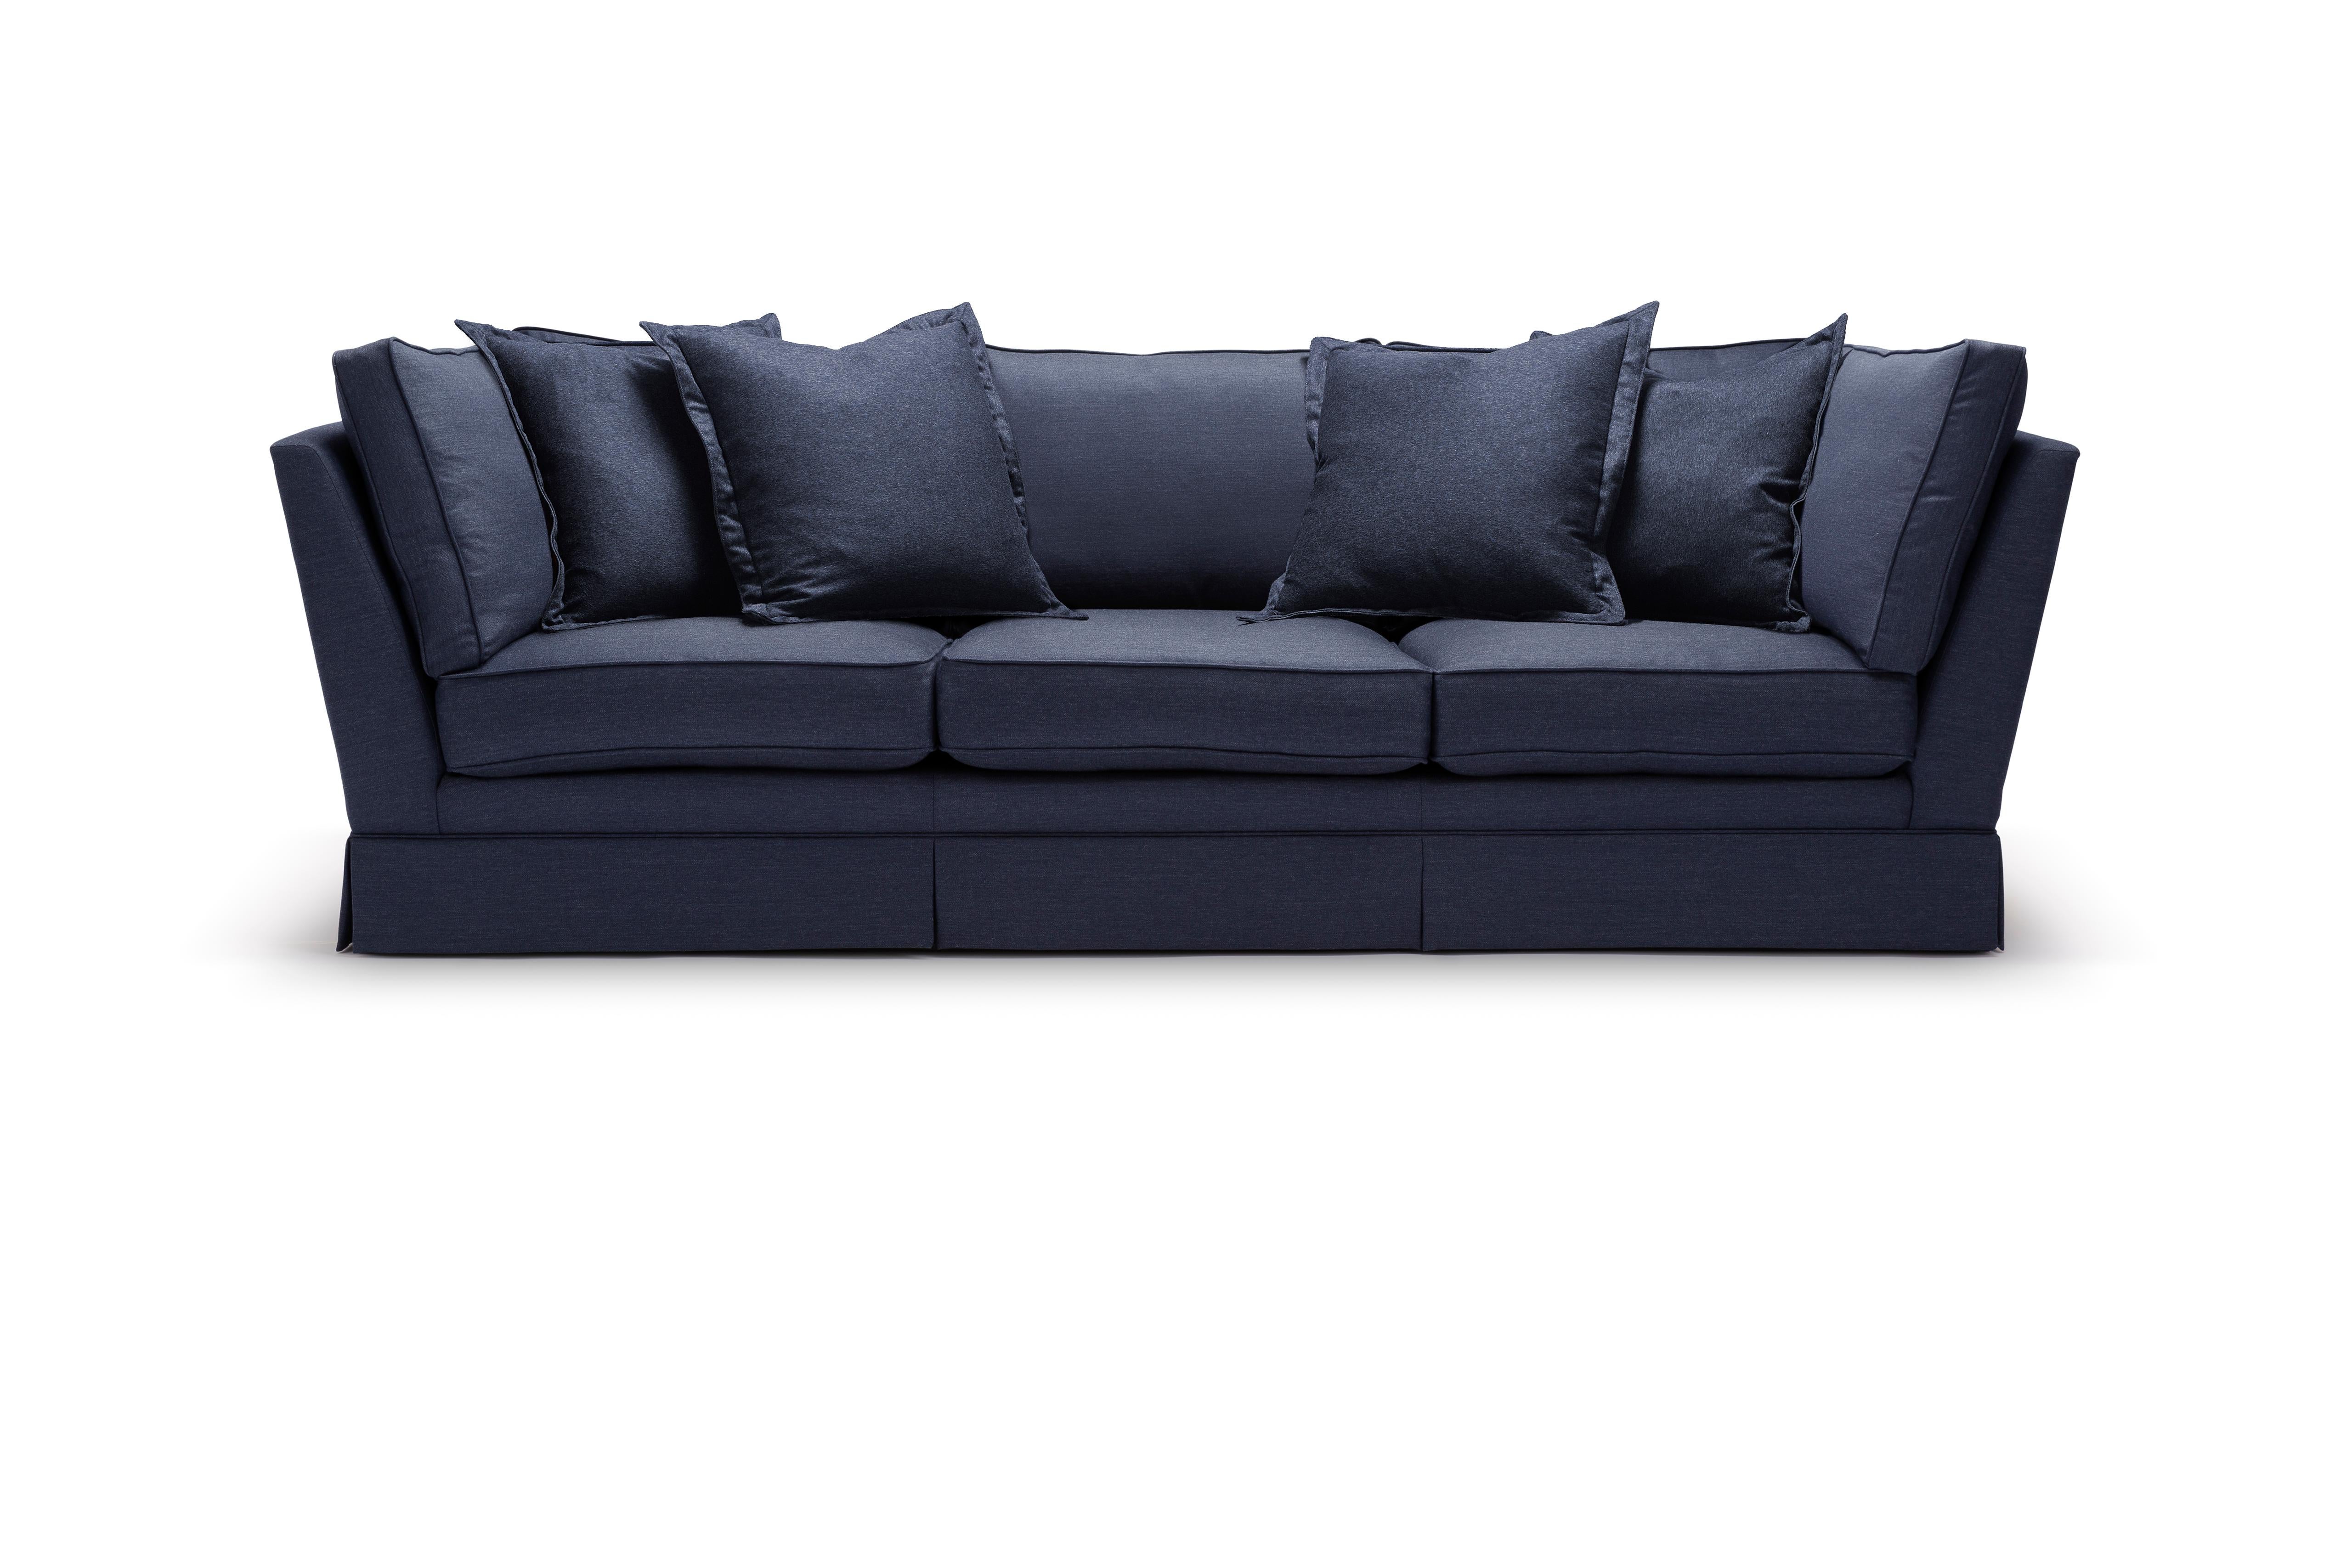 Modern Luxurious L shaped sofa tailored in British Wool Denim Blue Coil Sprung seat For Sale